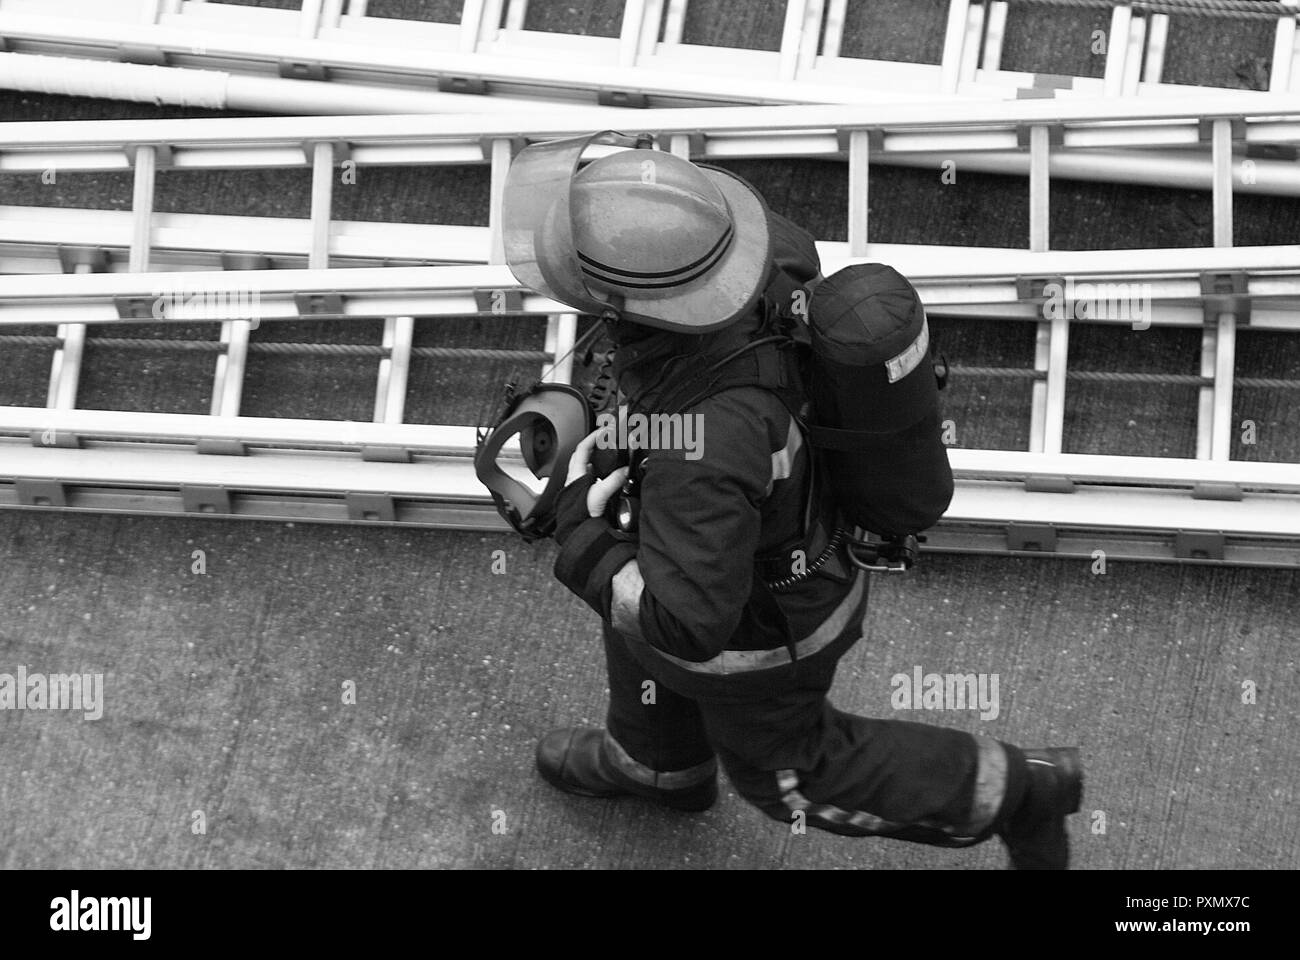 fire-fighter in full breathing apparatus at incident Stock Photo